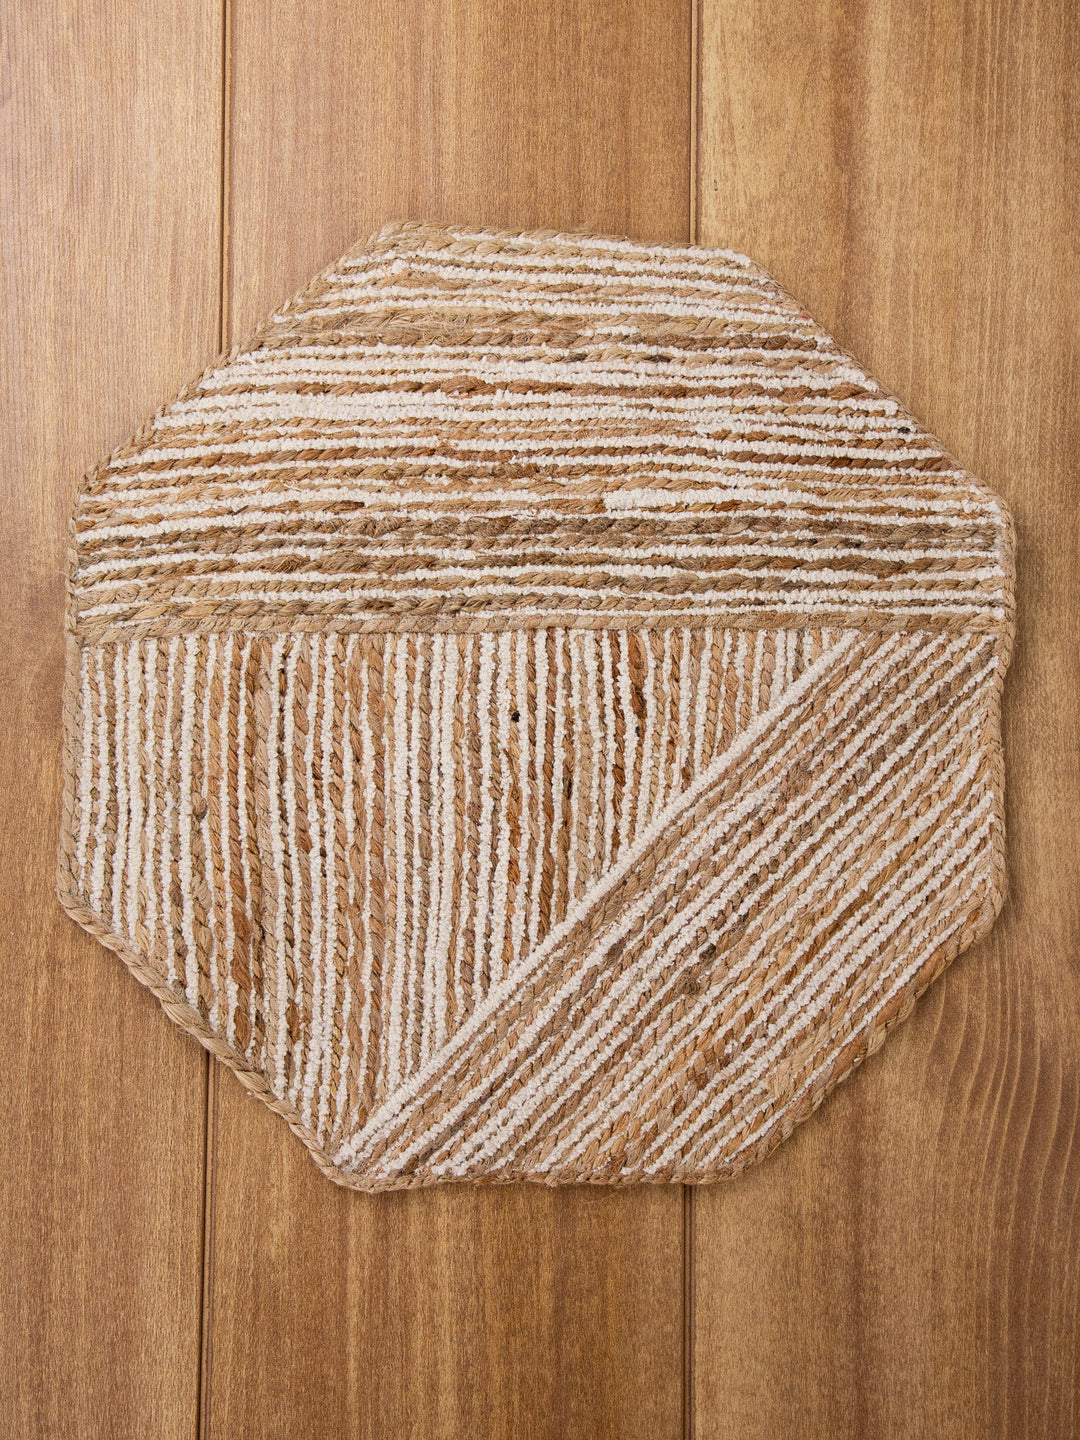 Cotton + Jute Octagon Placemat - Heyday